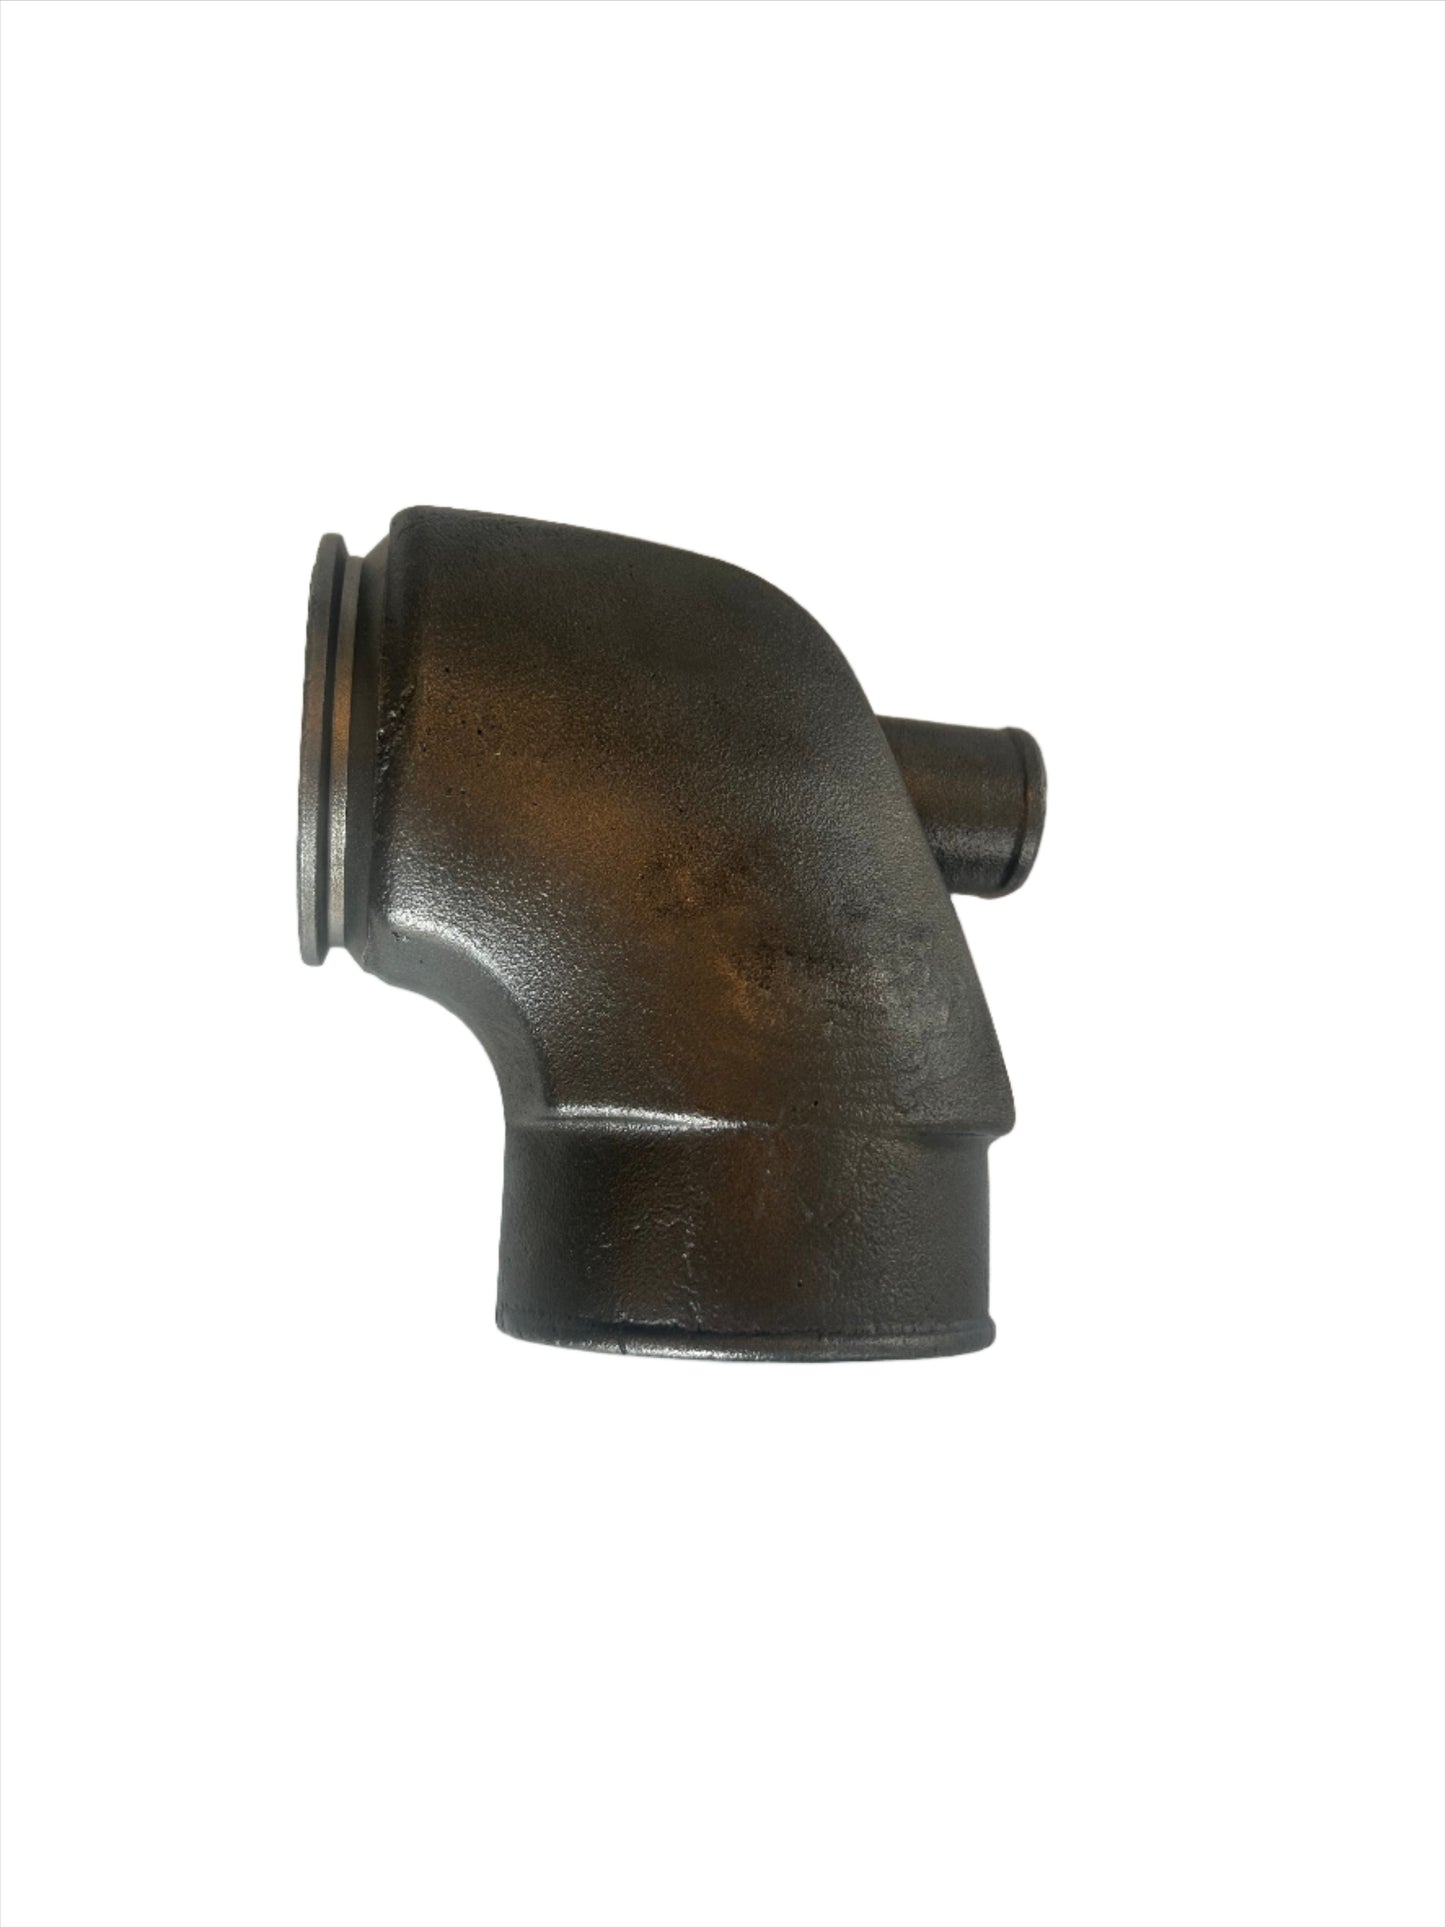 Volvo Penta exhaust outlet elbow - 861289